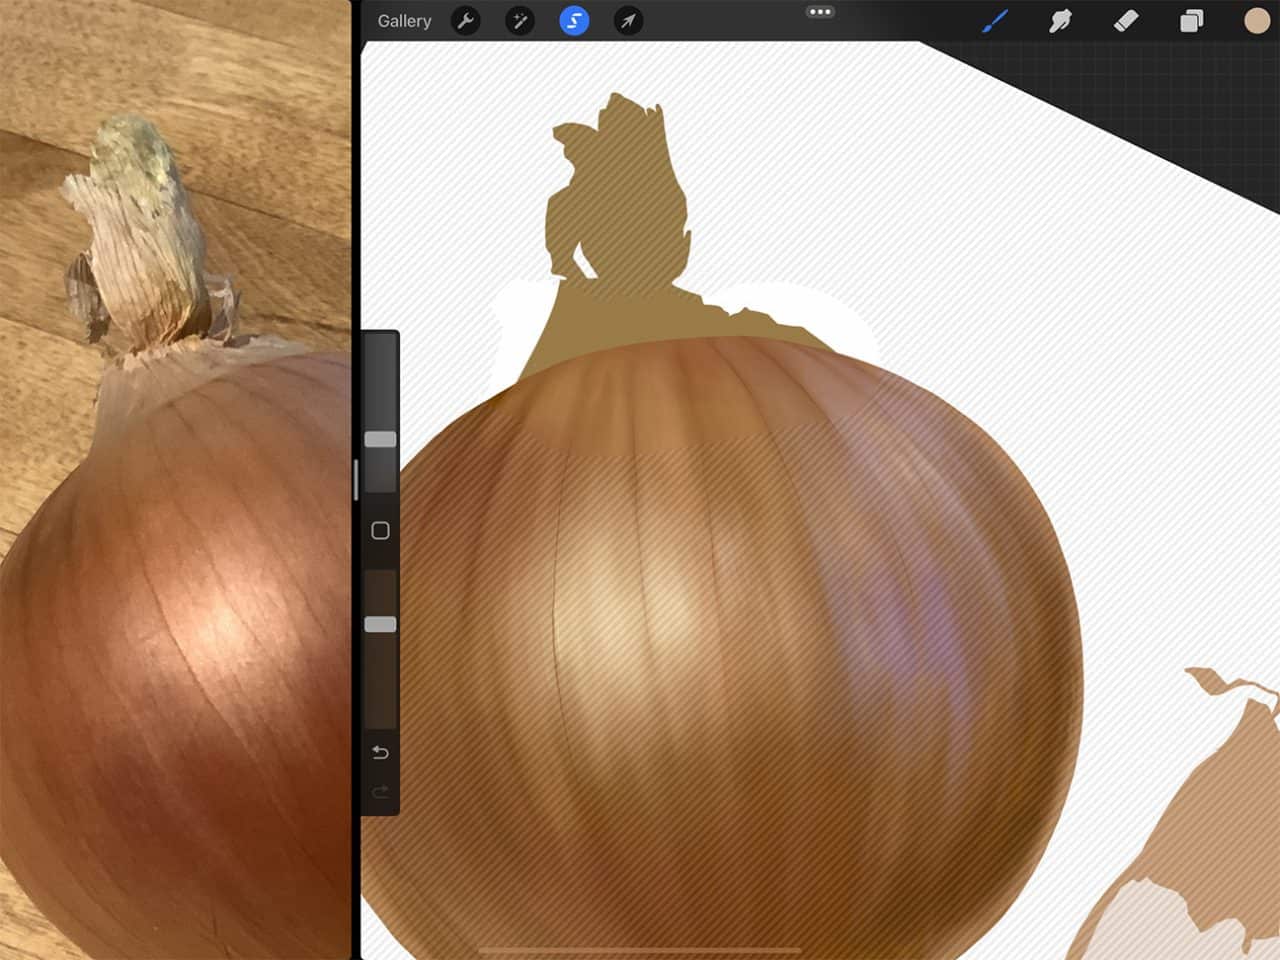 How To Draw Onions: Utilize digital drawing tools to make your illustration process easier.